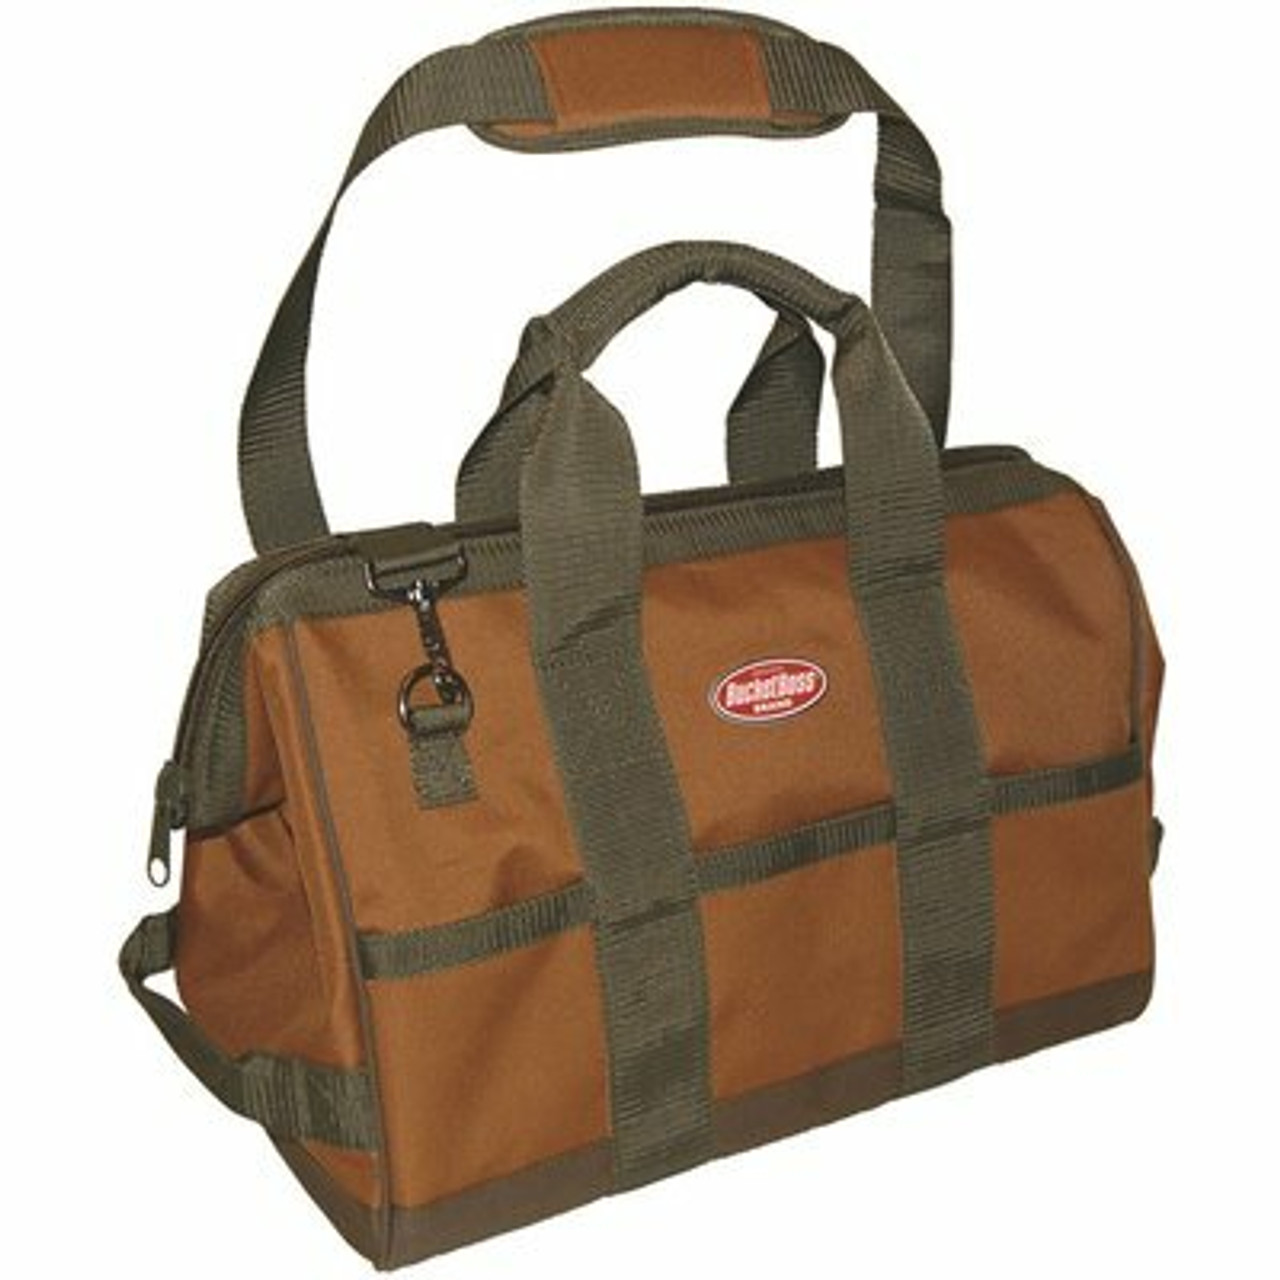 Bucket Boss Gatemouth 16 In. Tool Bag In Brown And Green With 16 Pockets